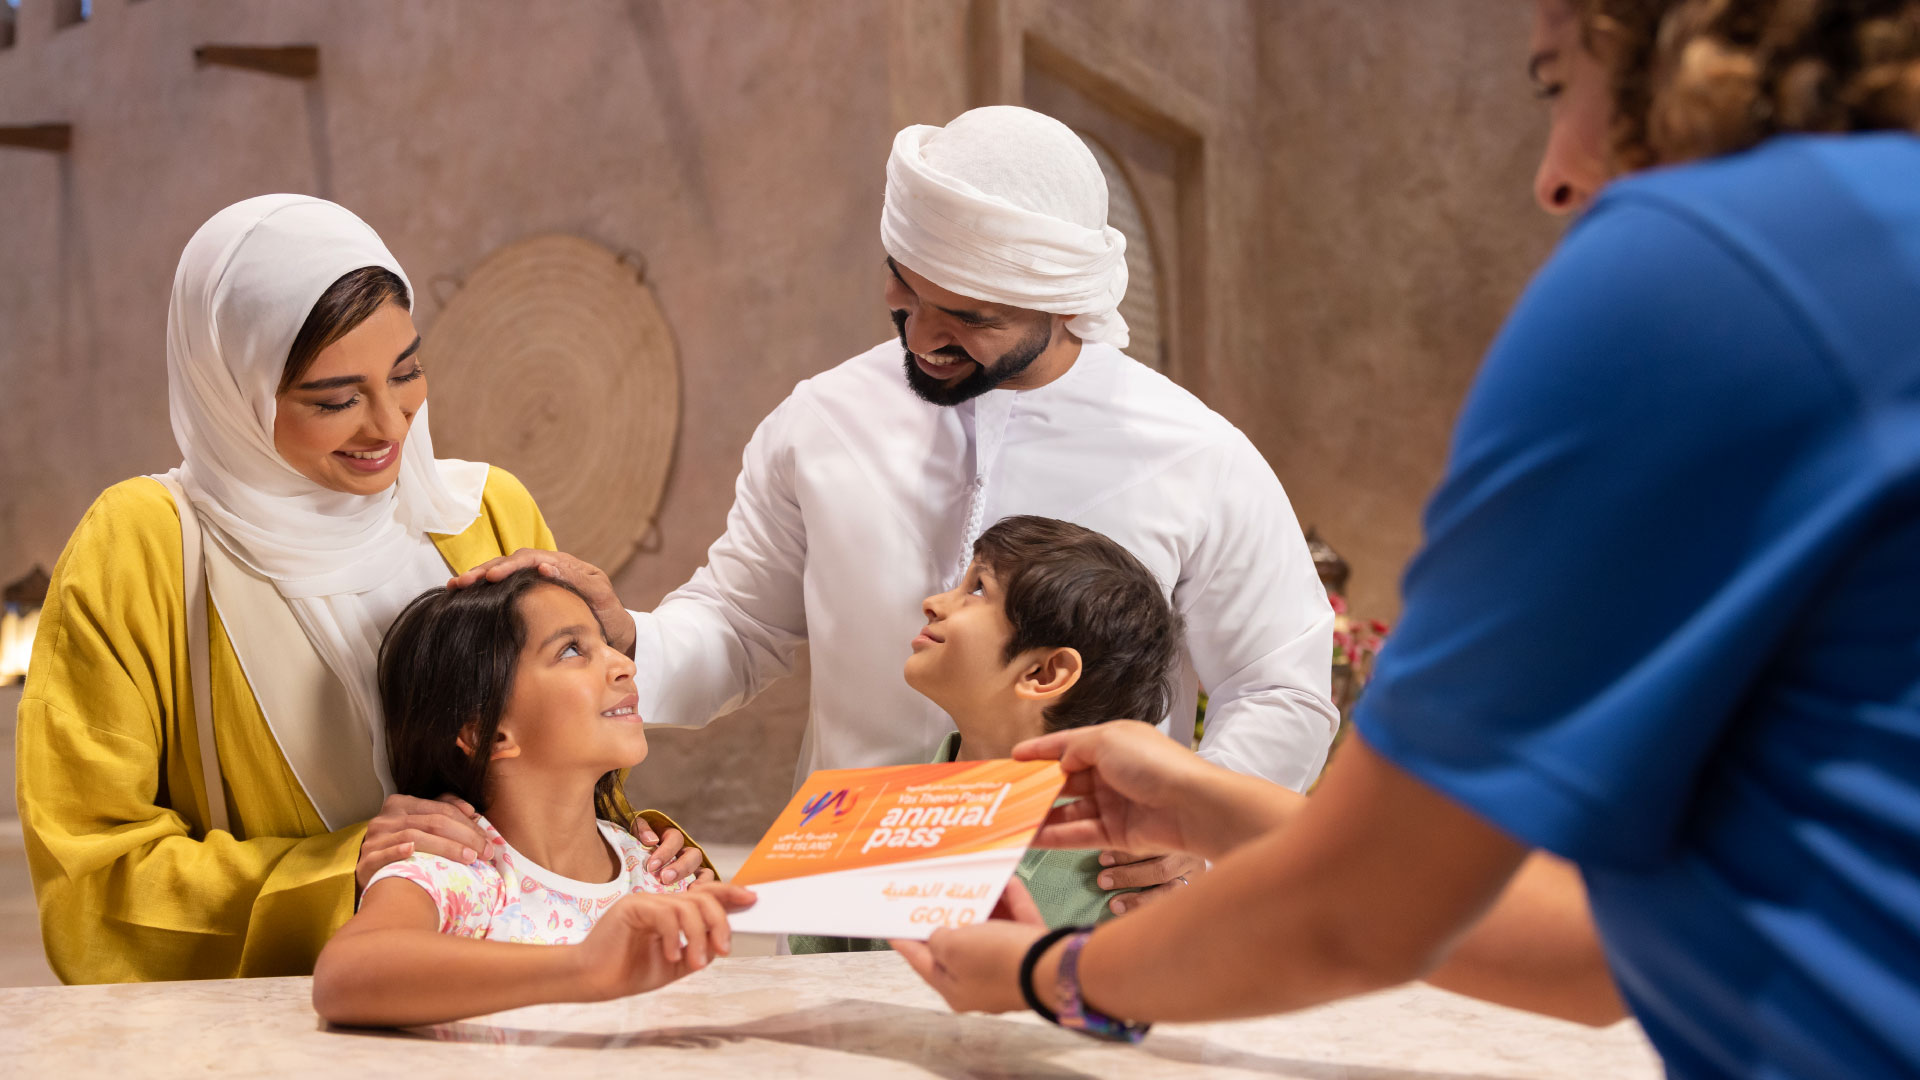 An Emirati Family with 2 children buying an Annual Pass